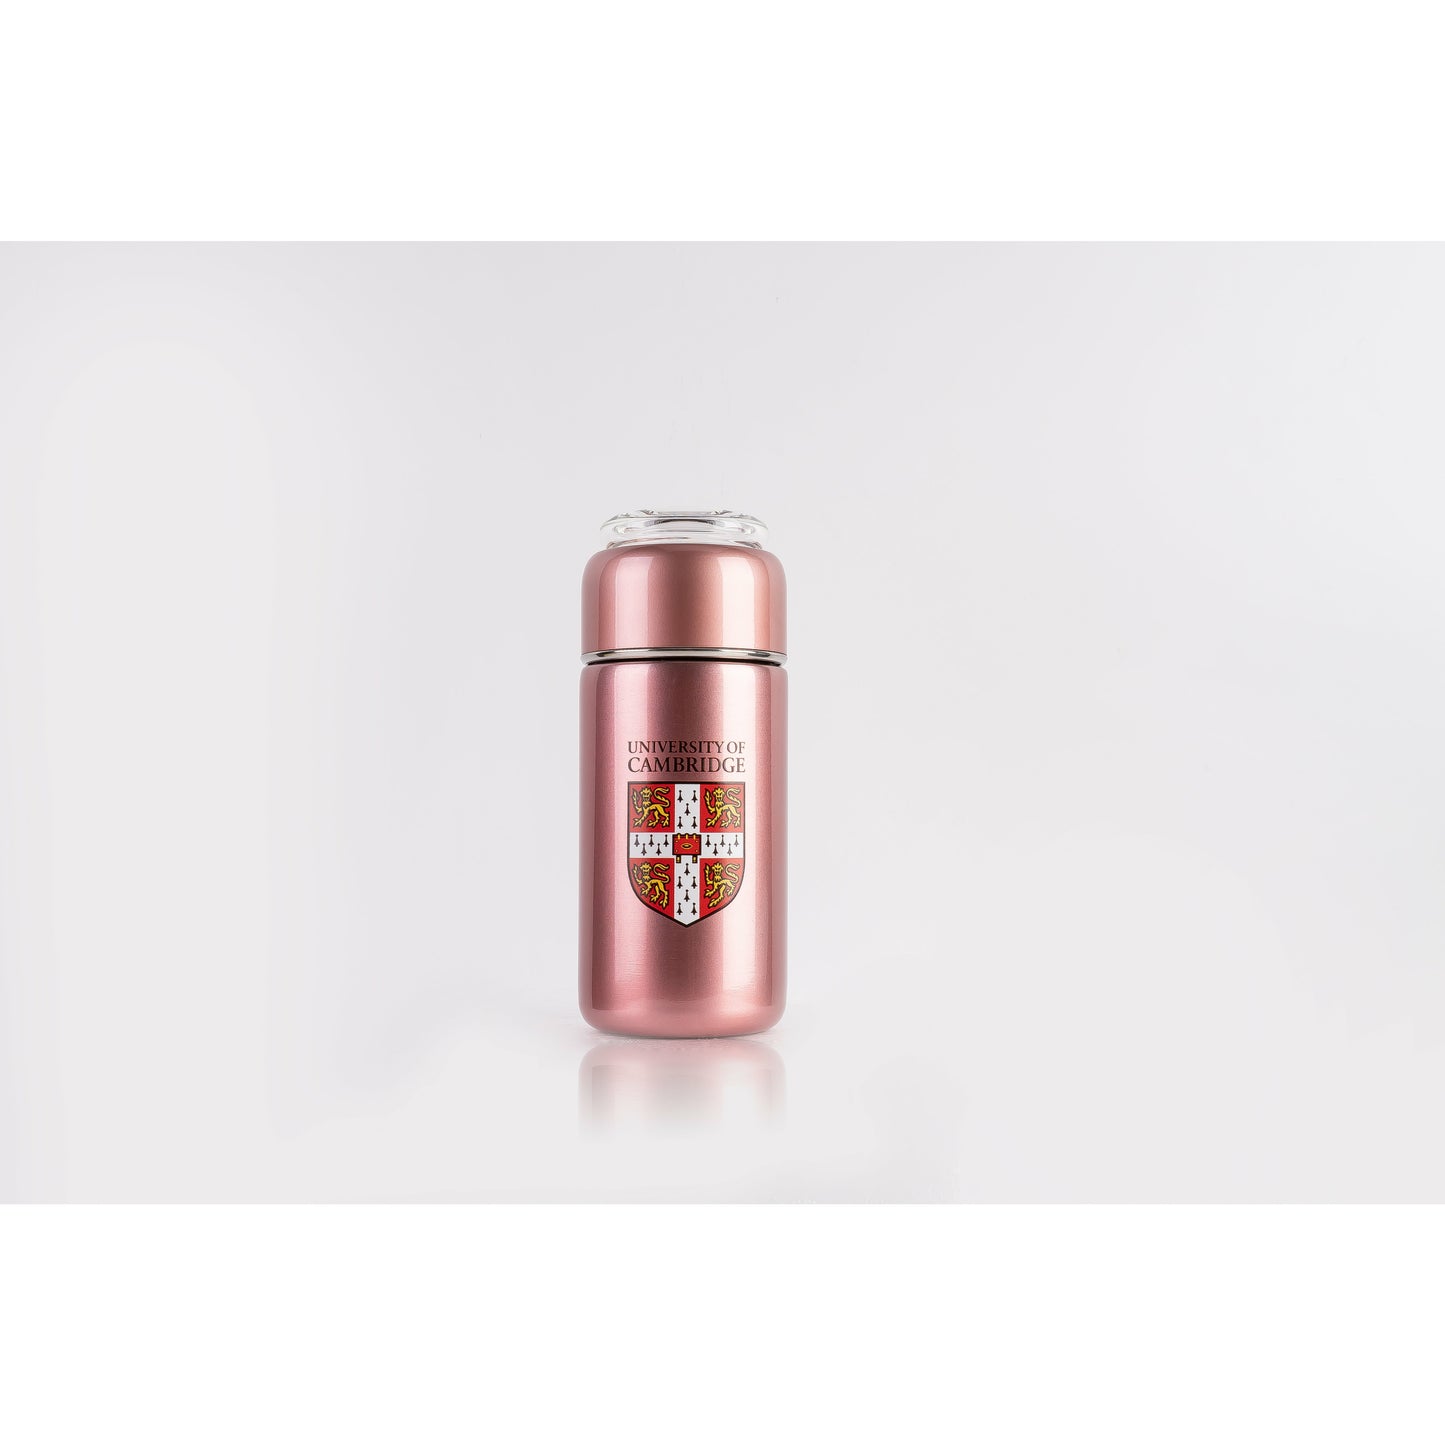 Tea infuser flask with clear glass top, rose gold/metallic pink colour. Decorated with University of Cambridge shield. 